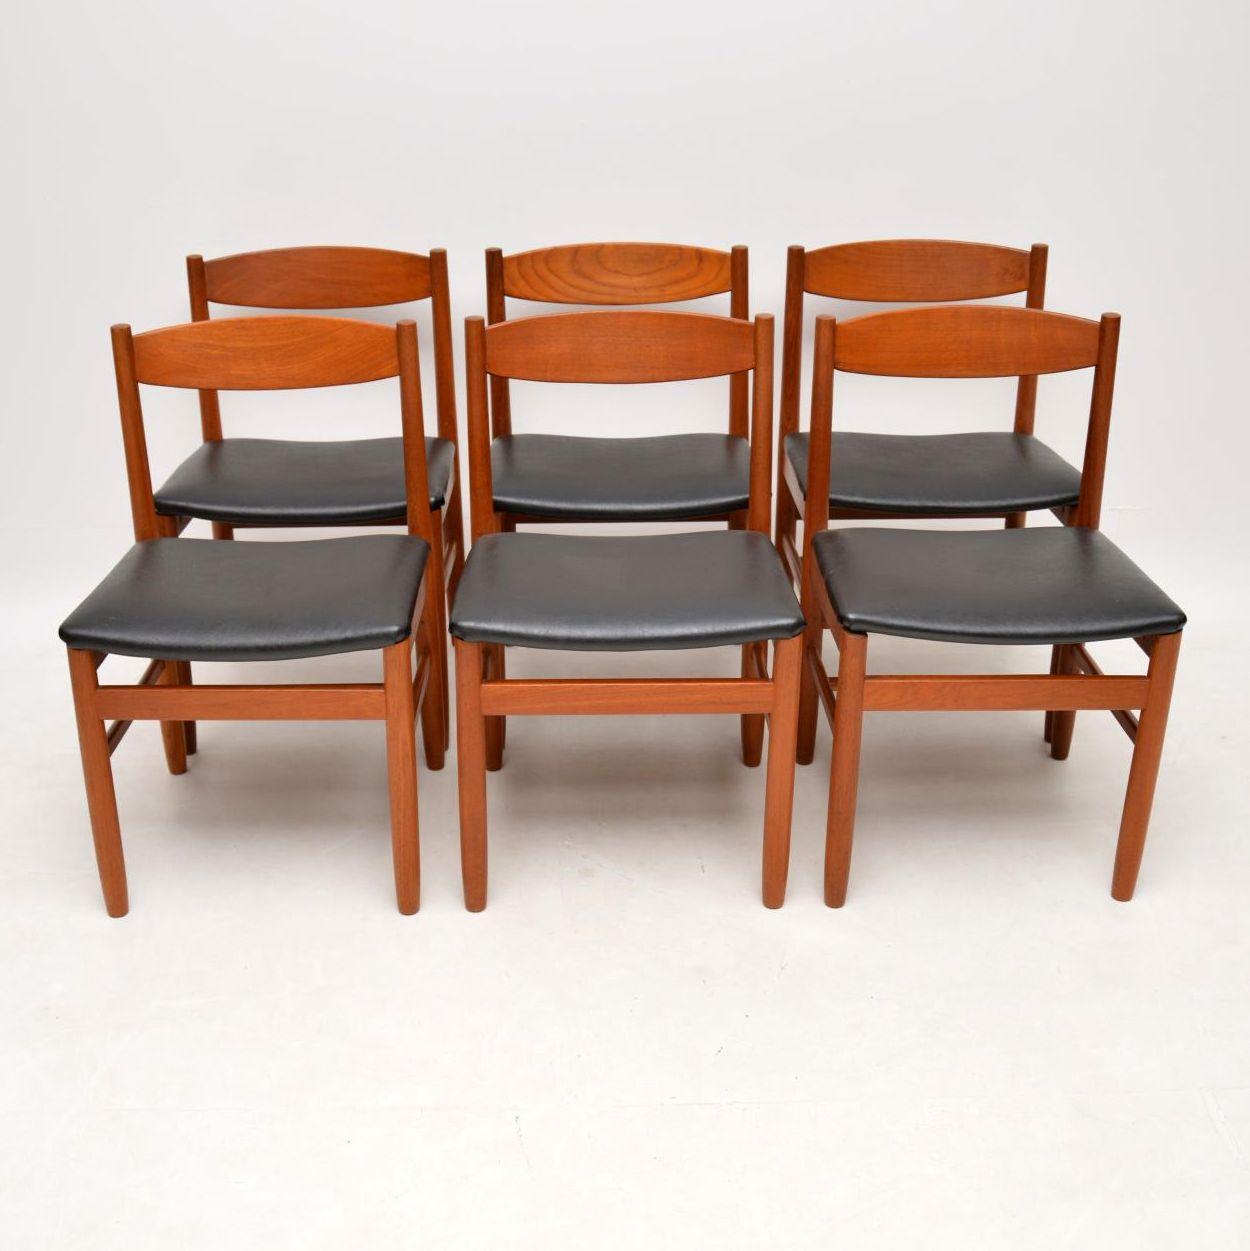 A beautiful and very well made set of six vintage teak dining chairs, these were designed by Robert Heritage, and made by Archie Shine in the 1960s. They are in excellent condition for their age; they are all clean, sturdy and sound, with only some